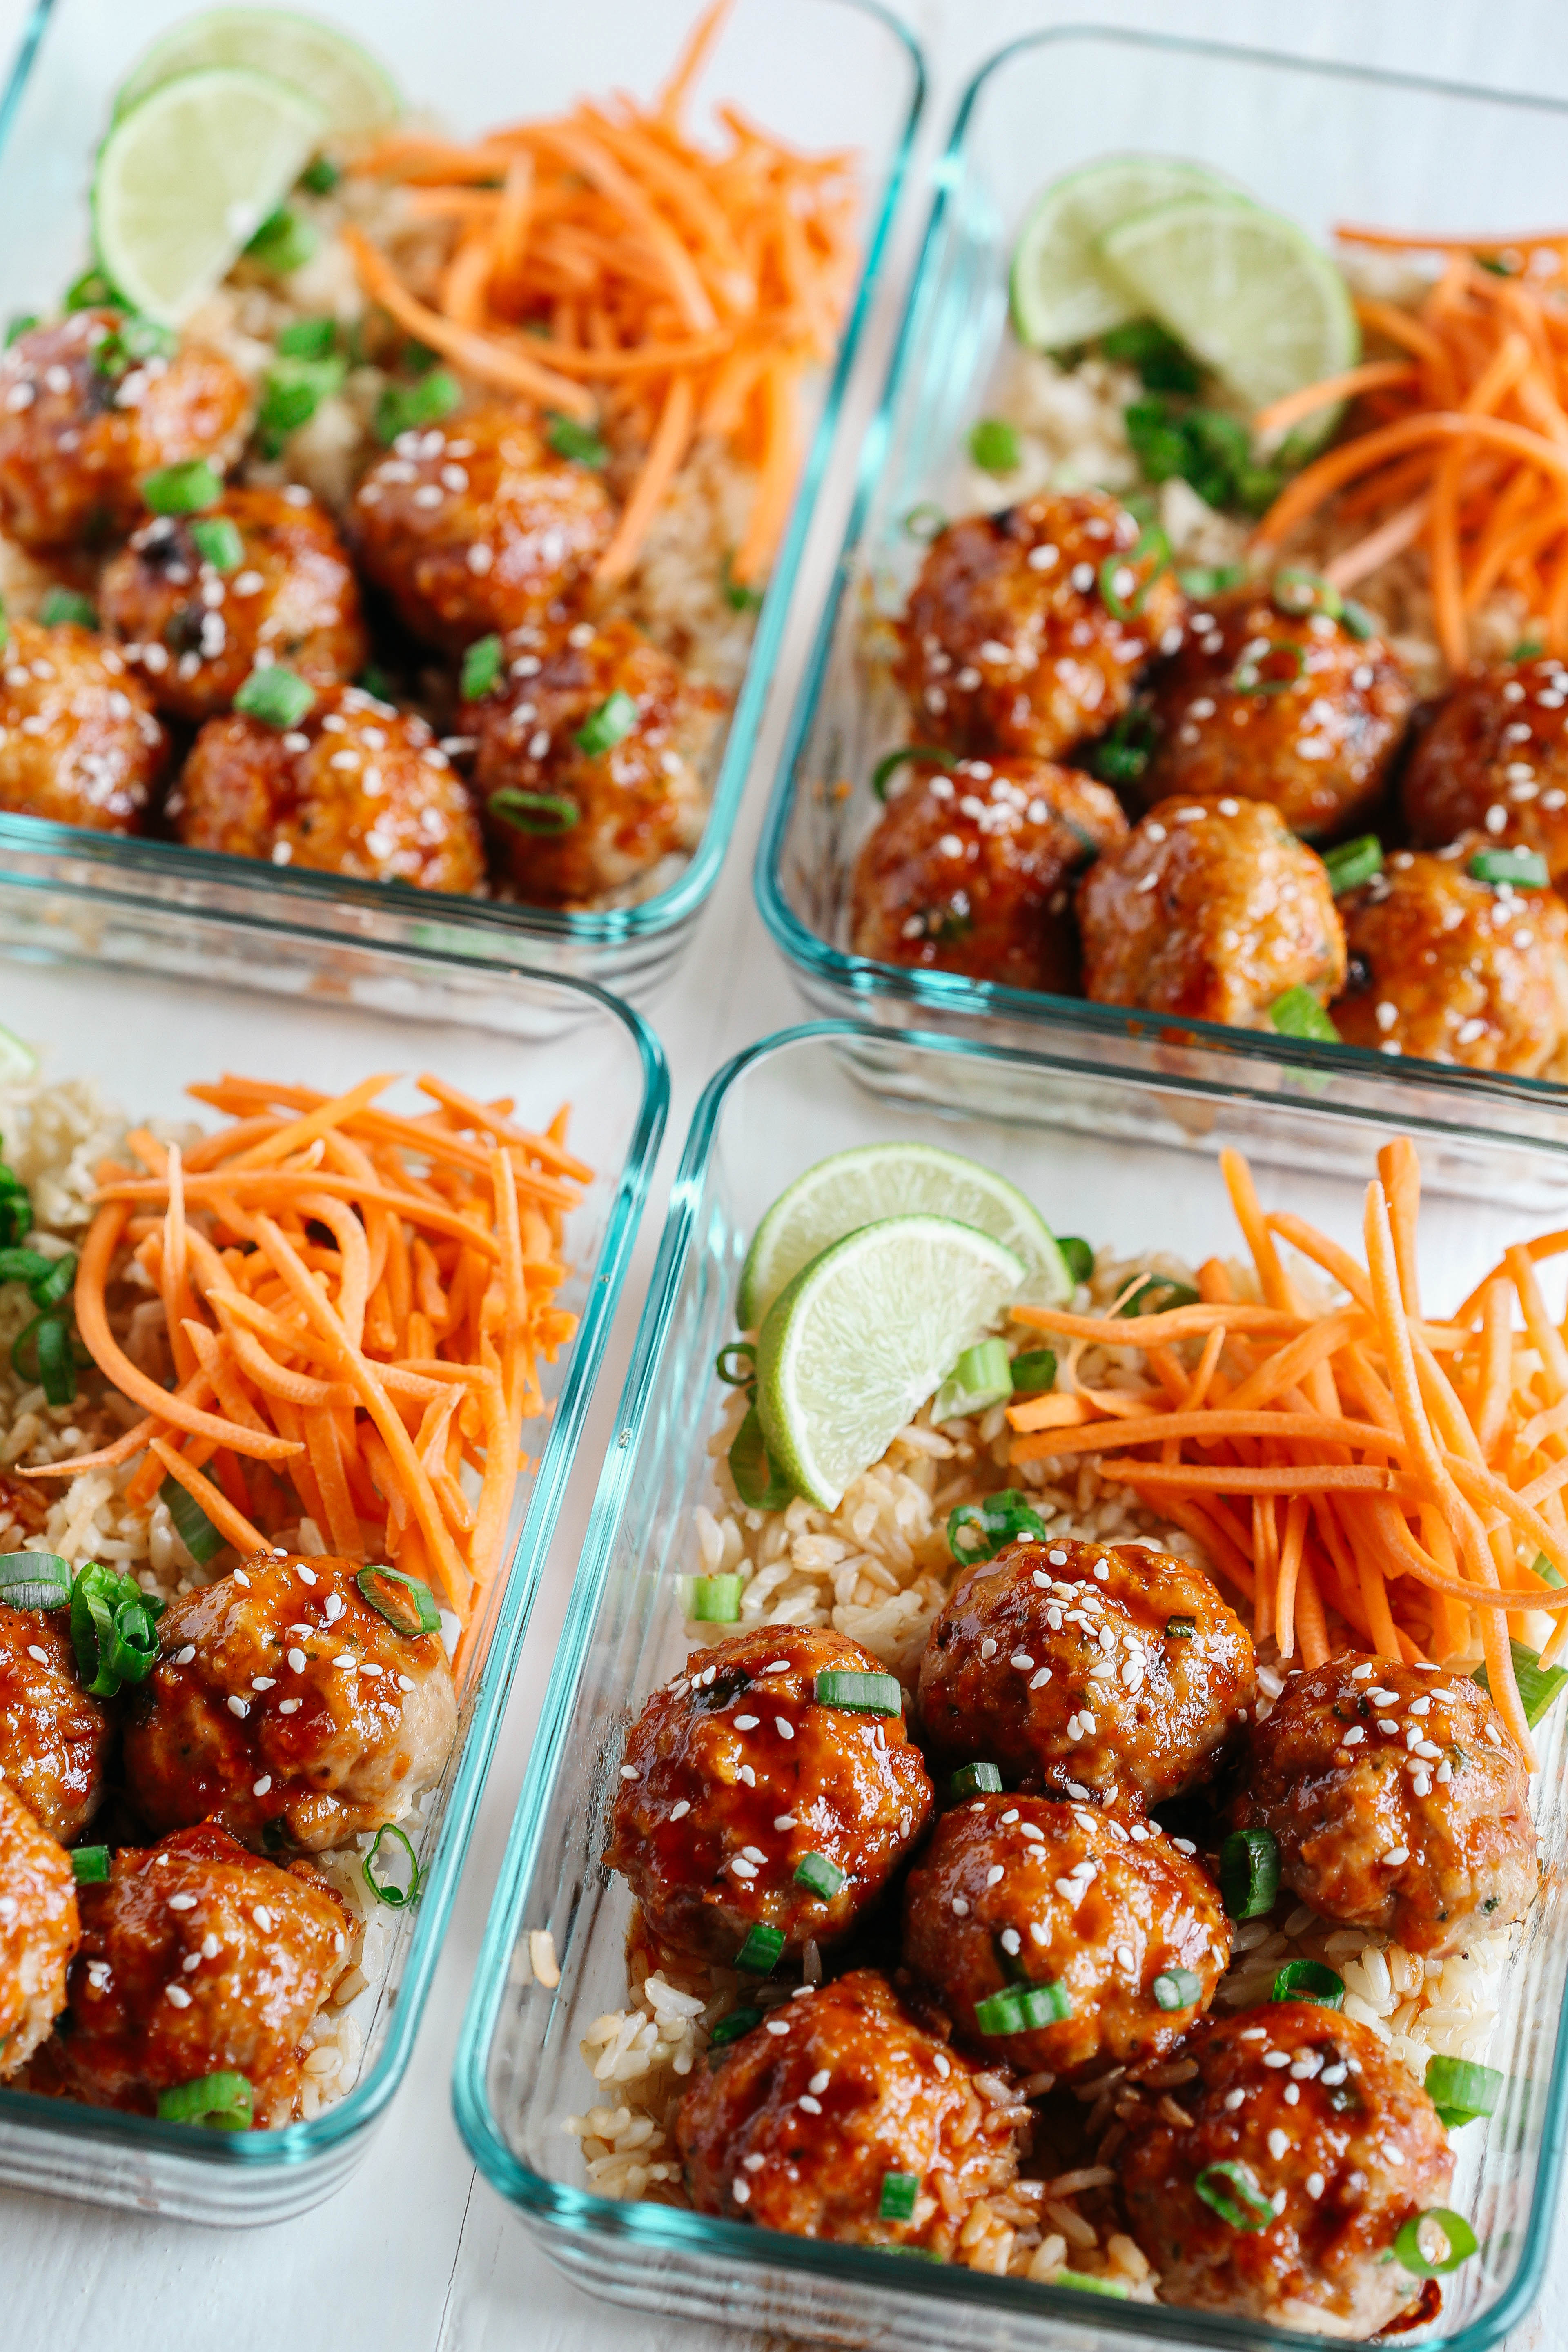 These Honey Sriracha Glazed Meatballs are sweet, spicy and full of so much flavor! They also take less than 30 minutes to make and are perfect for weekly meal prep!